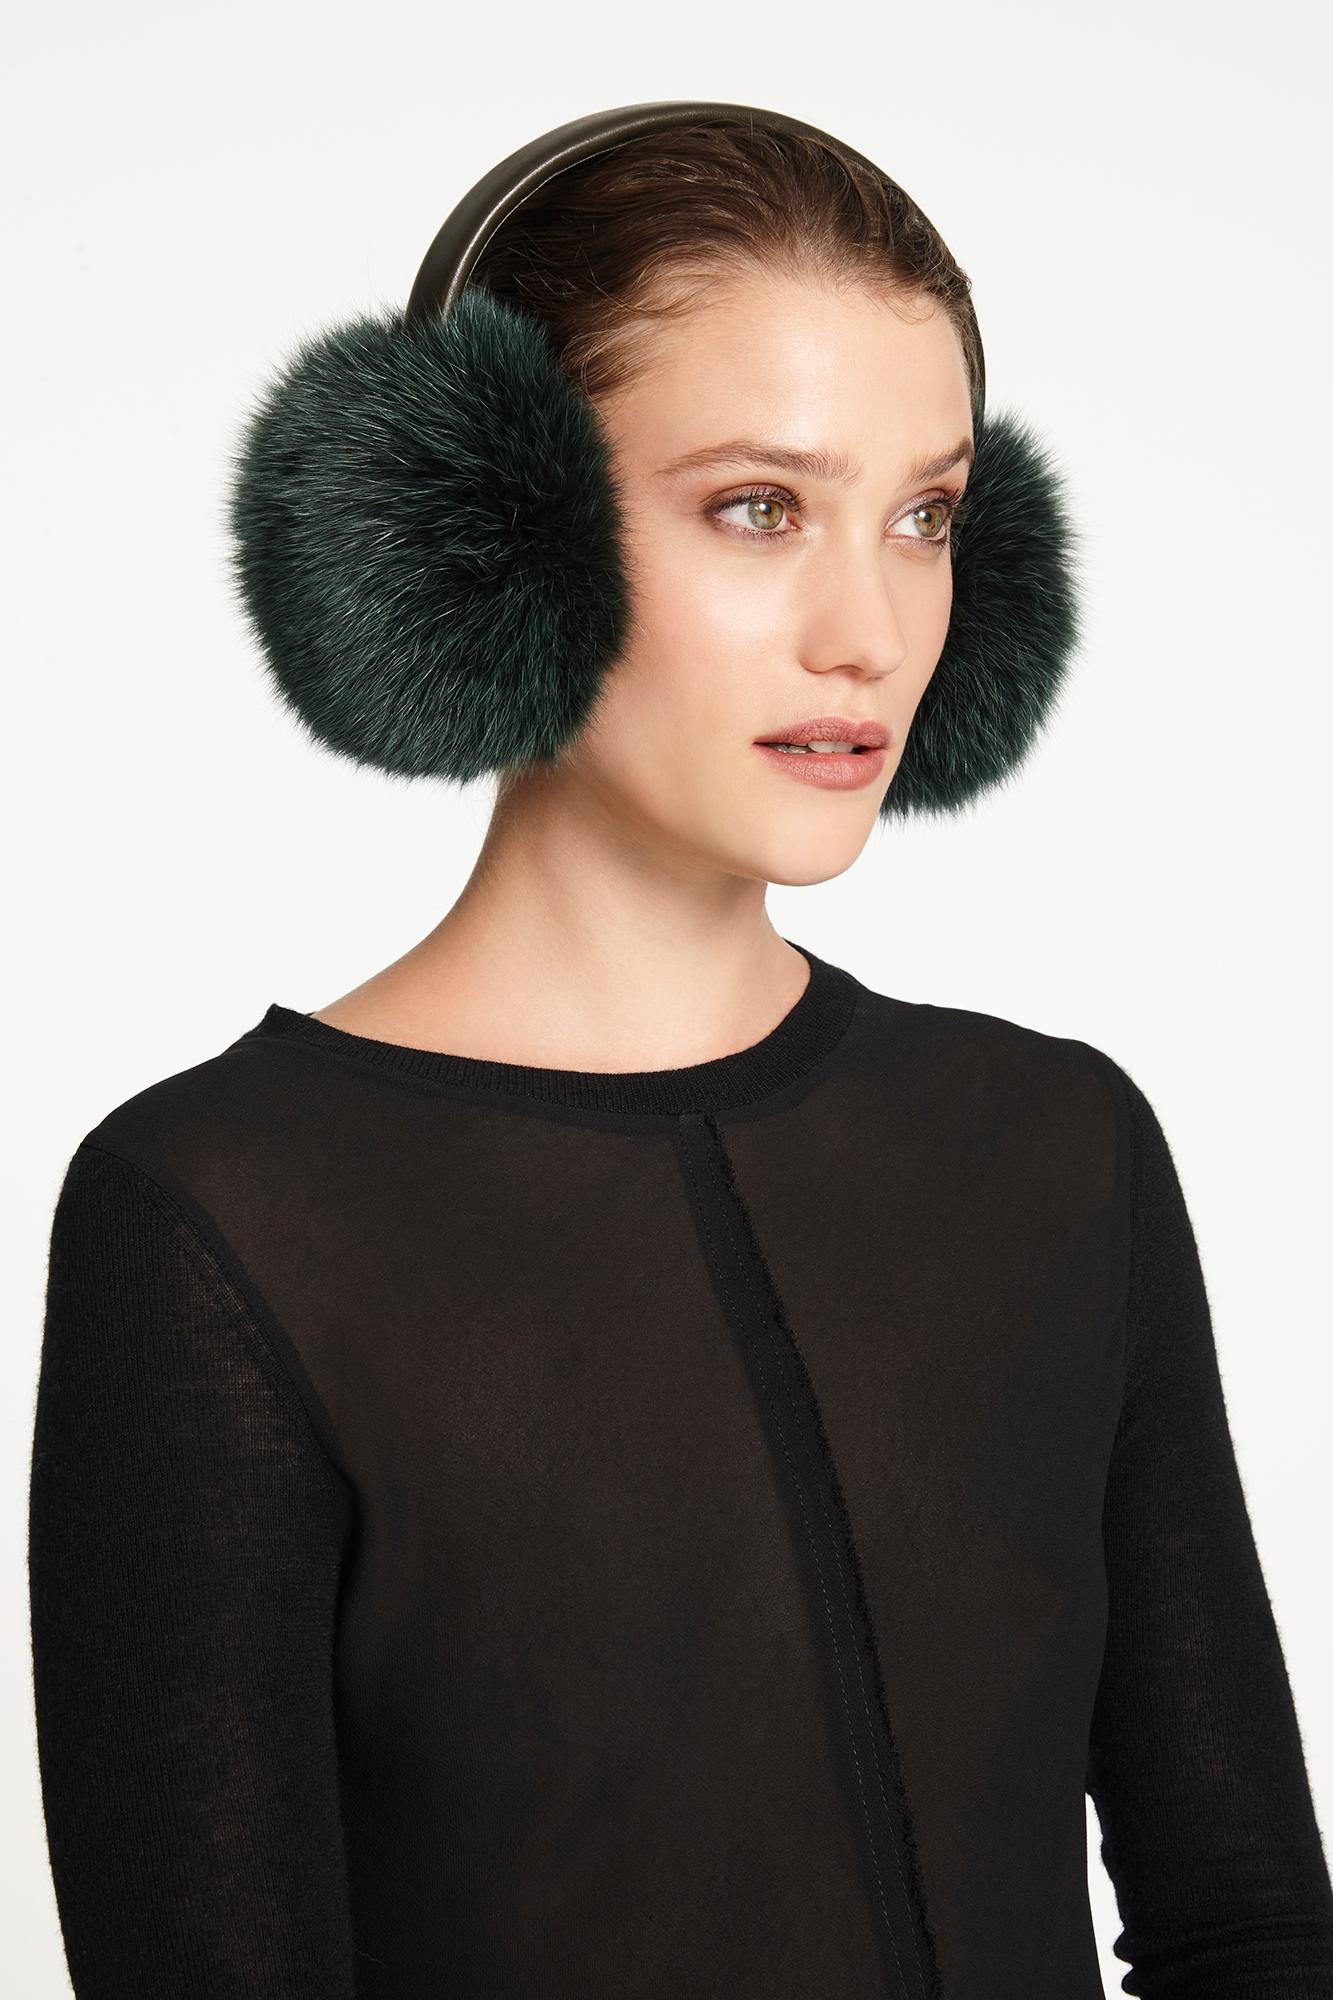 Verheyen London Fox ear muffs are the perfect accessory for winter/autumn dressing. Stay cosy all winter in these luxurious and sumptuous ear muffs wherever you go.


All fur is origin assured and ethically sourced from regulated farms with good